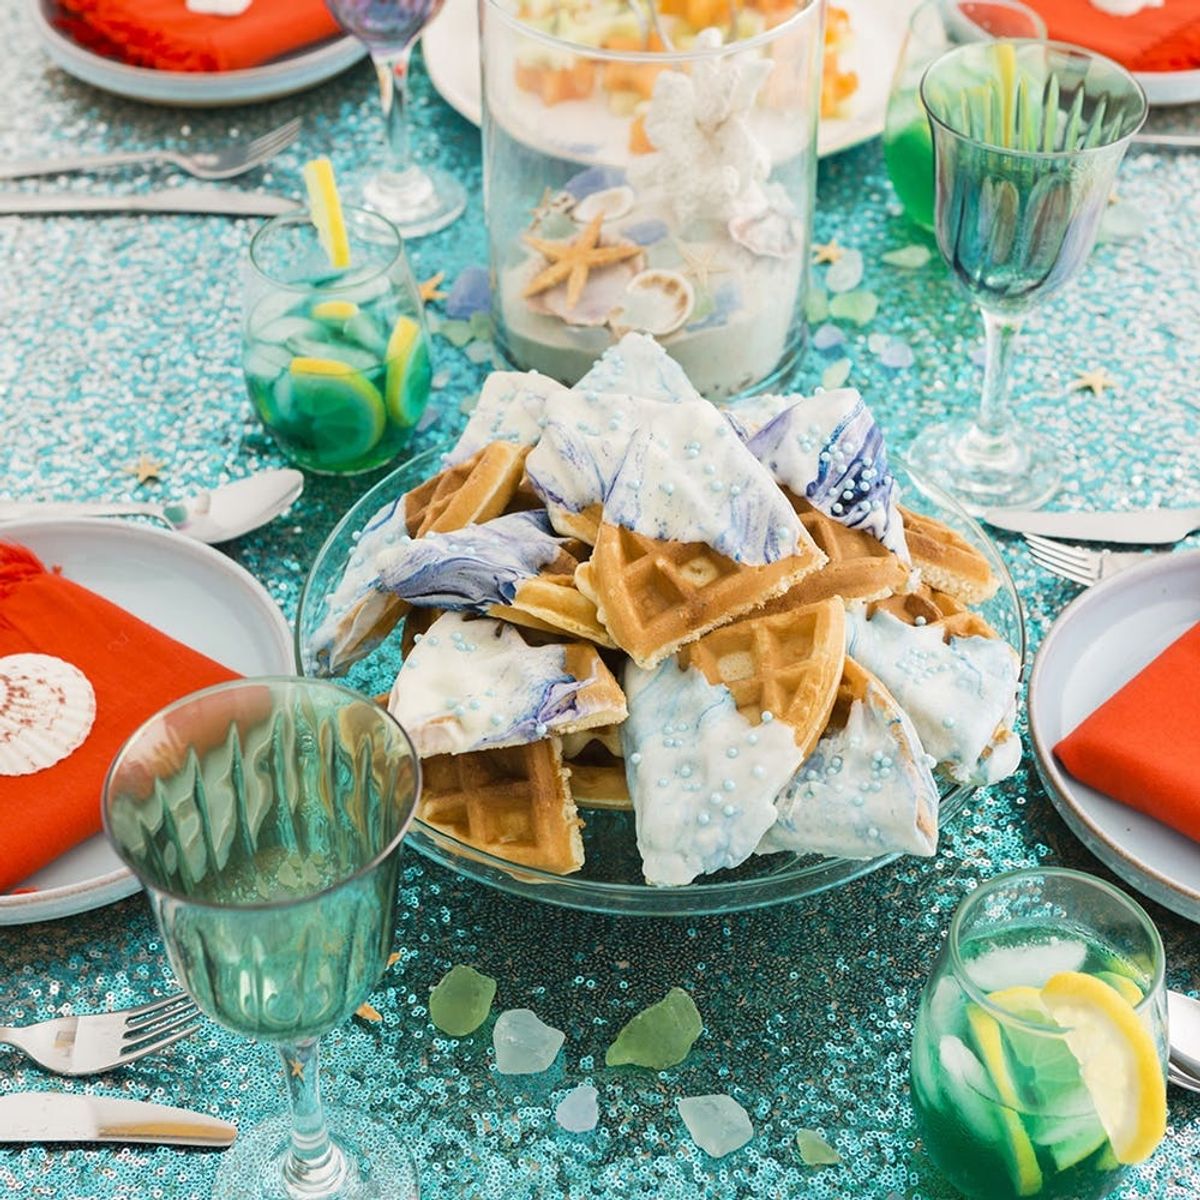 Go Under the Sea With This Little Mermaid-Inspired Boozy Brunch